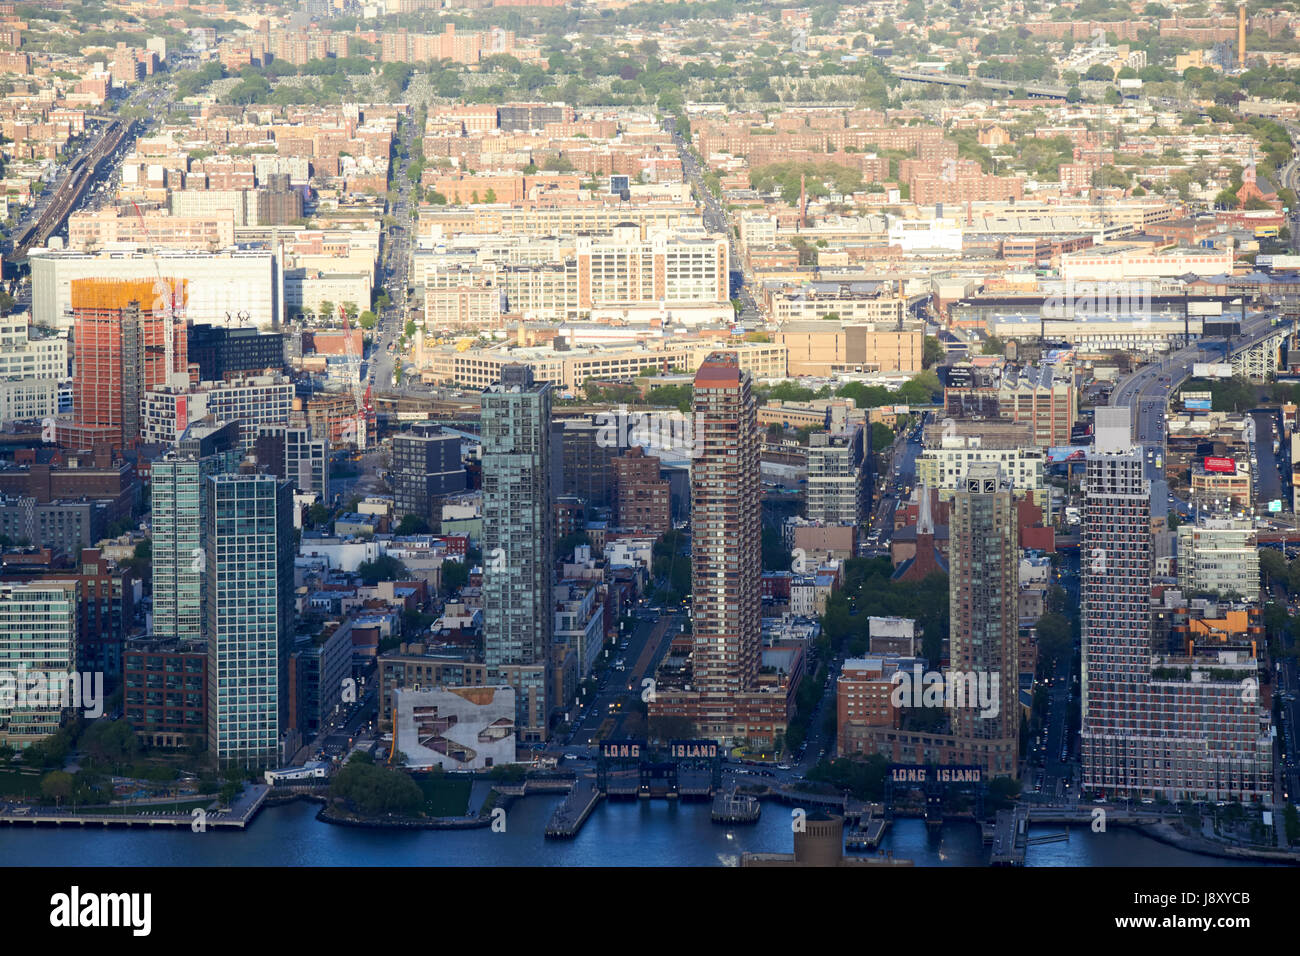 aerial view of long island city queens New York City USA Stock Photo